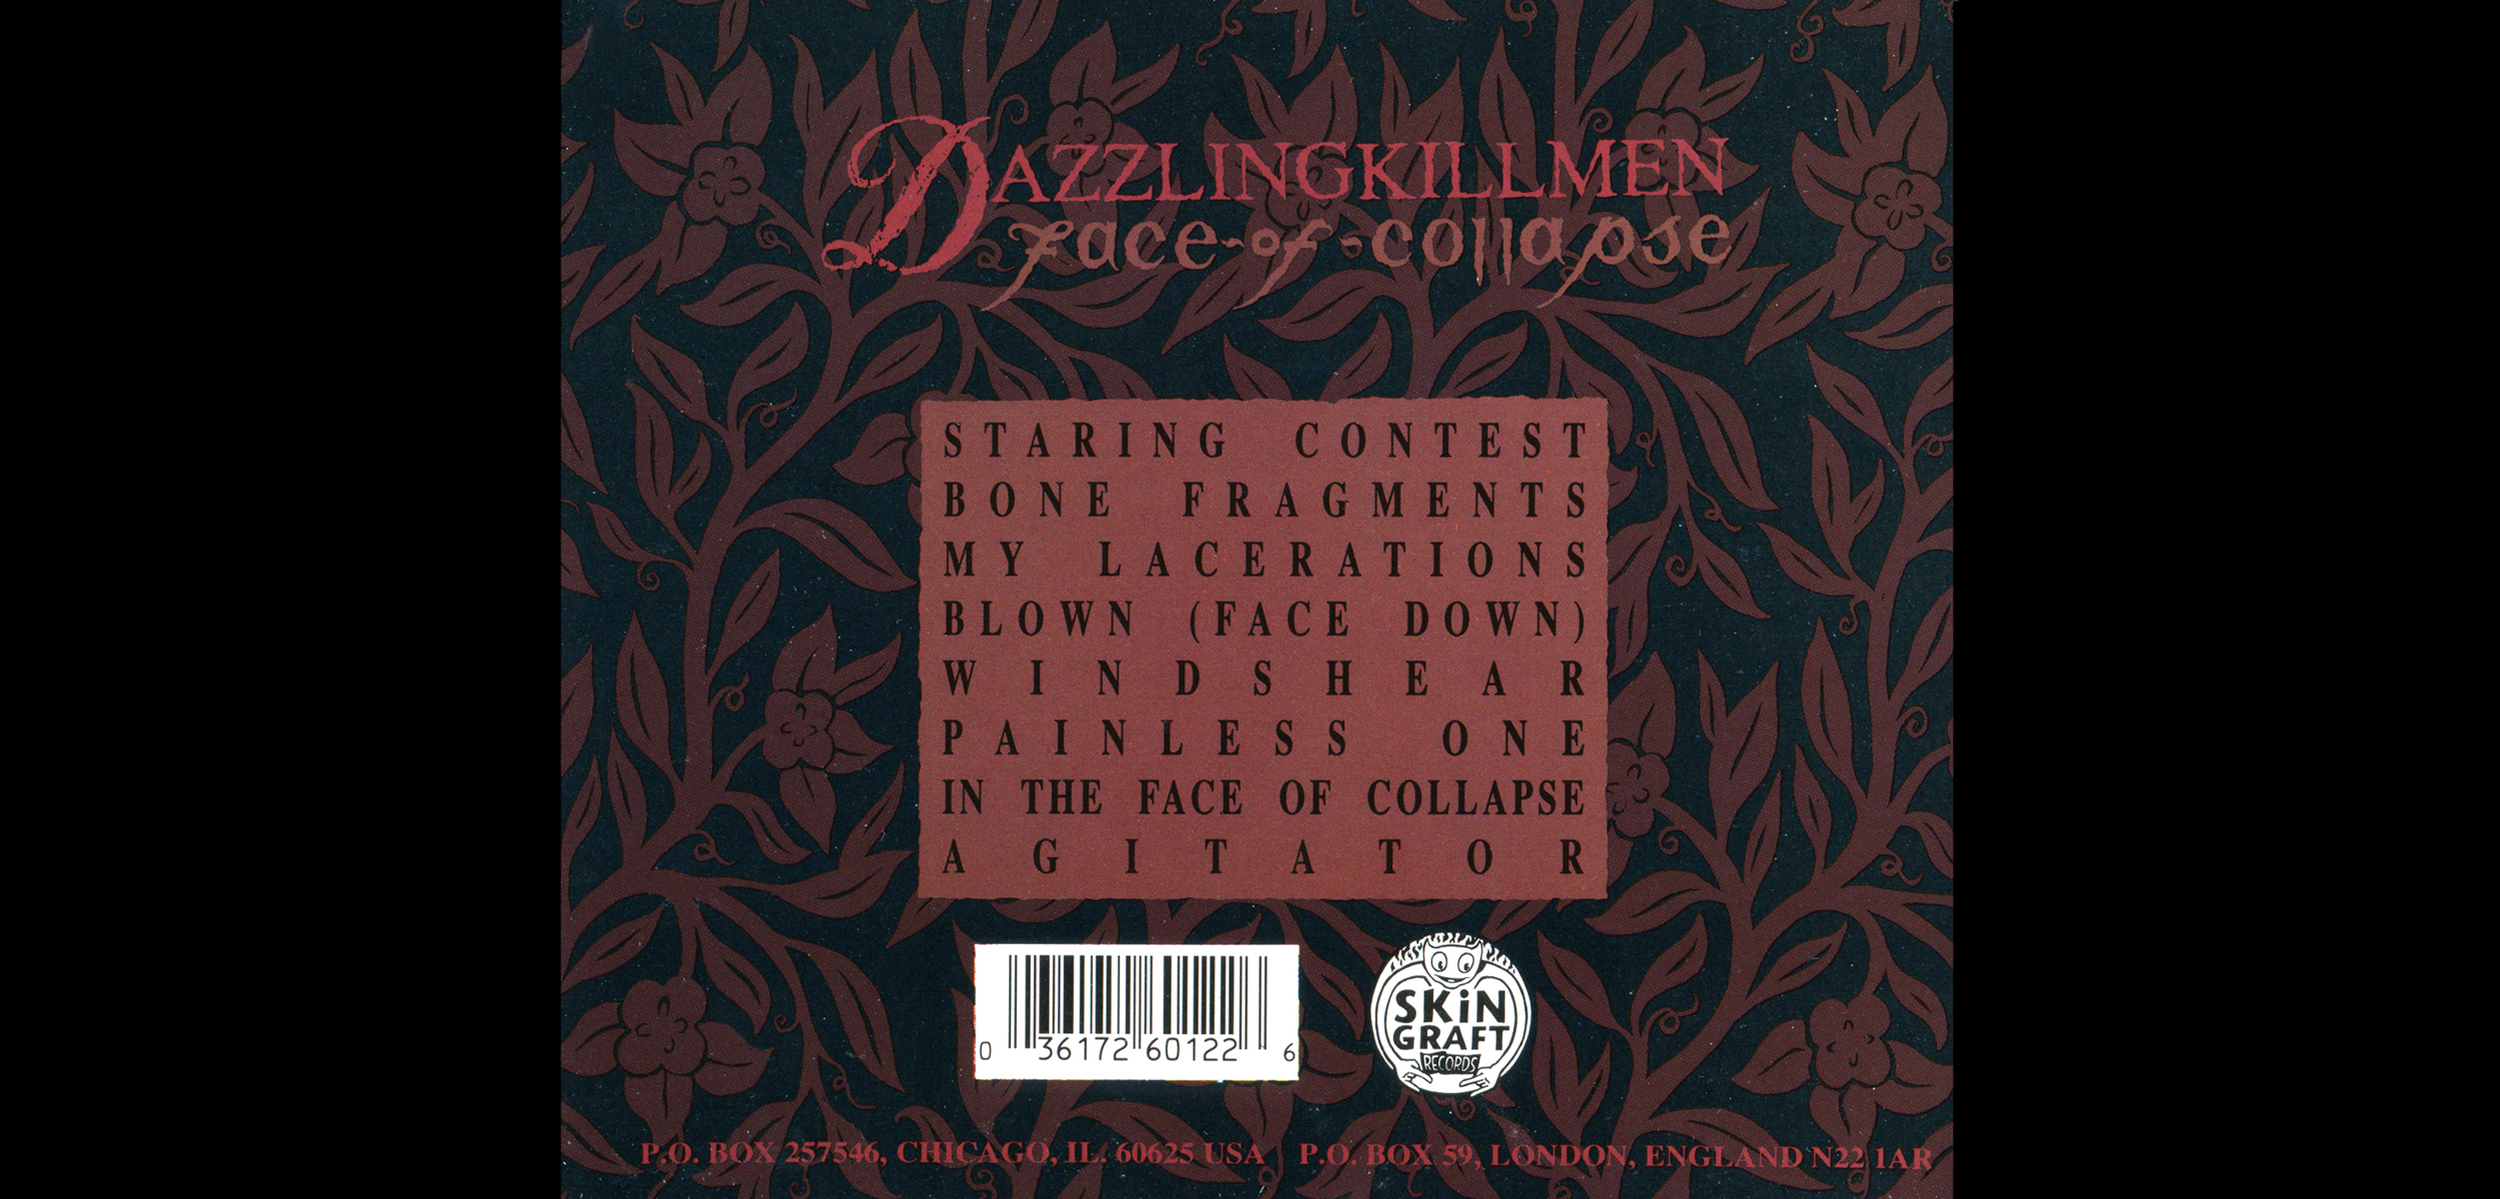   Dazzling Killmen,  Face of Collapse . CD Tray, Back.  1994. Pen and ink. Released by Skin Graft Records. 